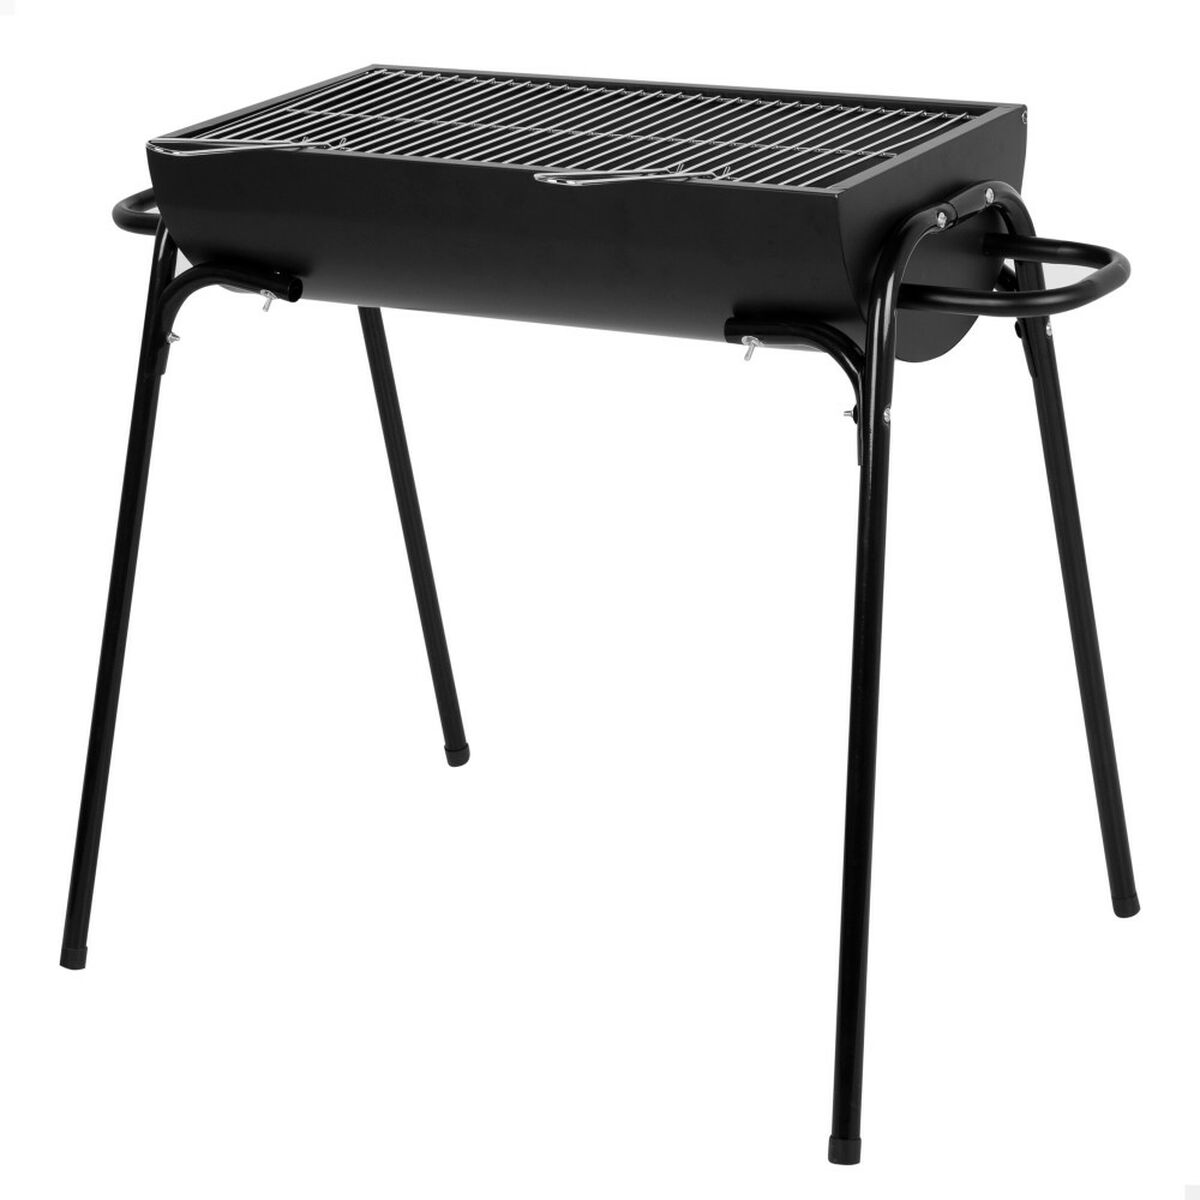 Barbecue Portable Aktive Metal Stainless steel 91 x 71 x 33 cm